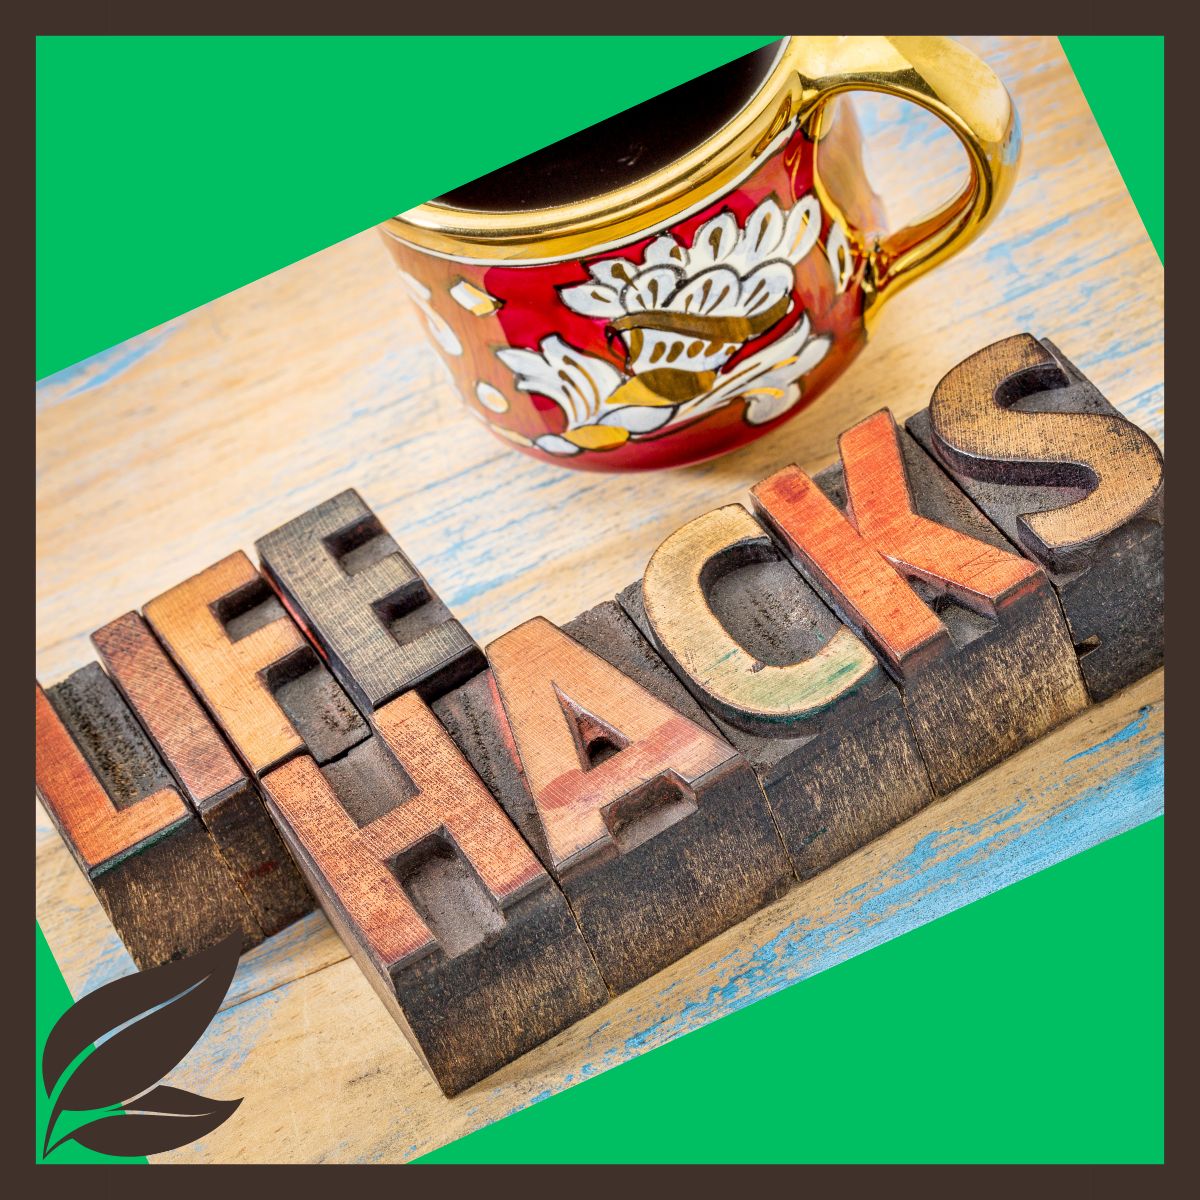 Life hacks spelled out of wood blocks on a coffee table.